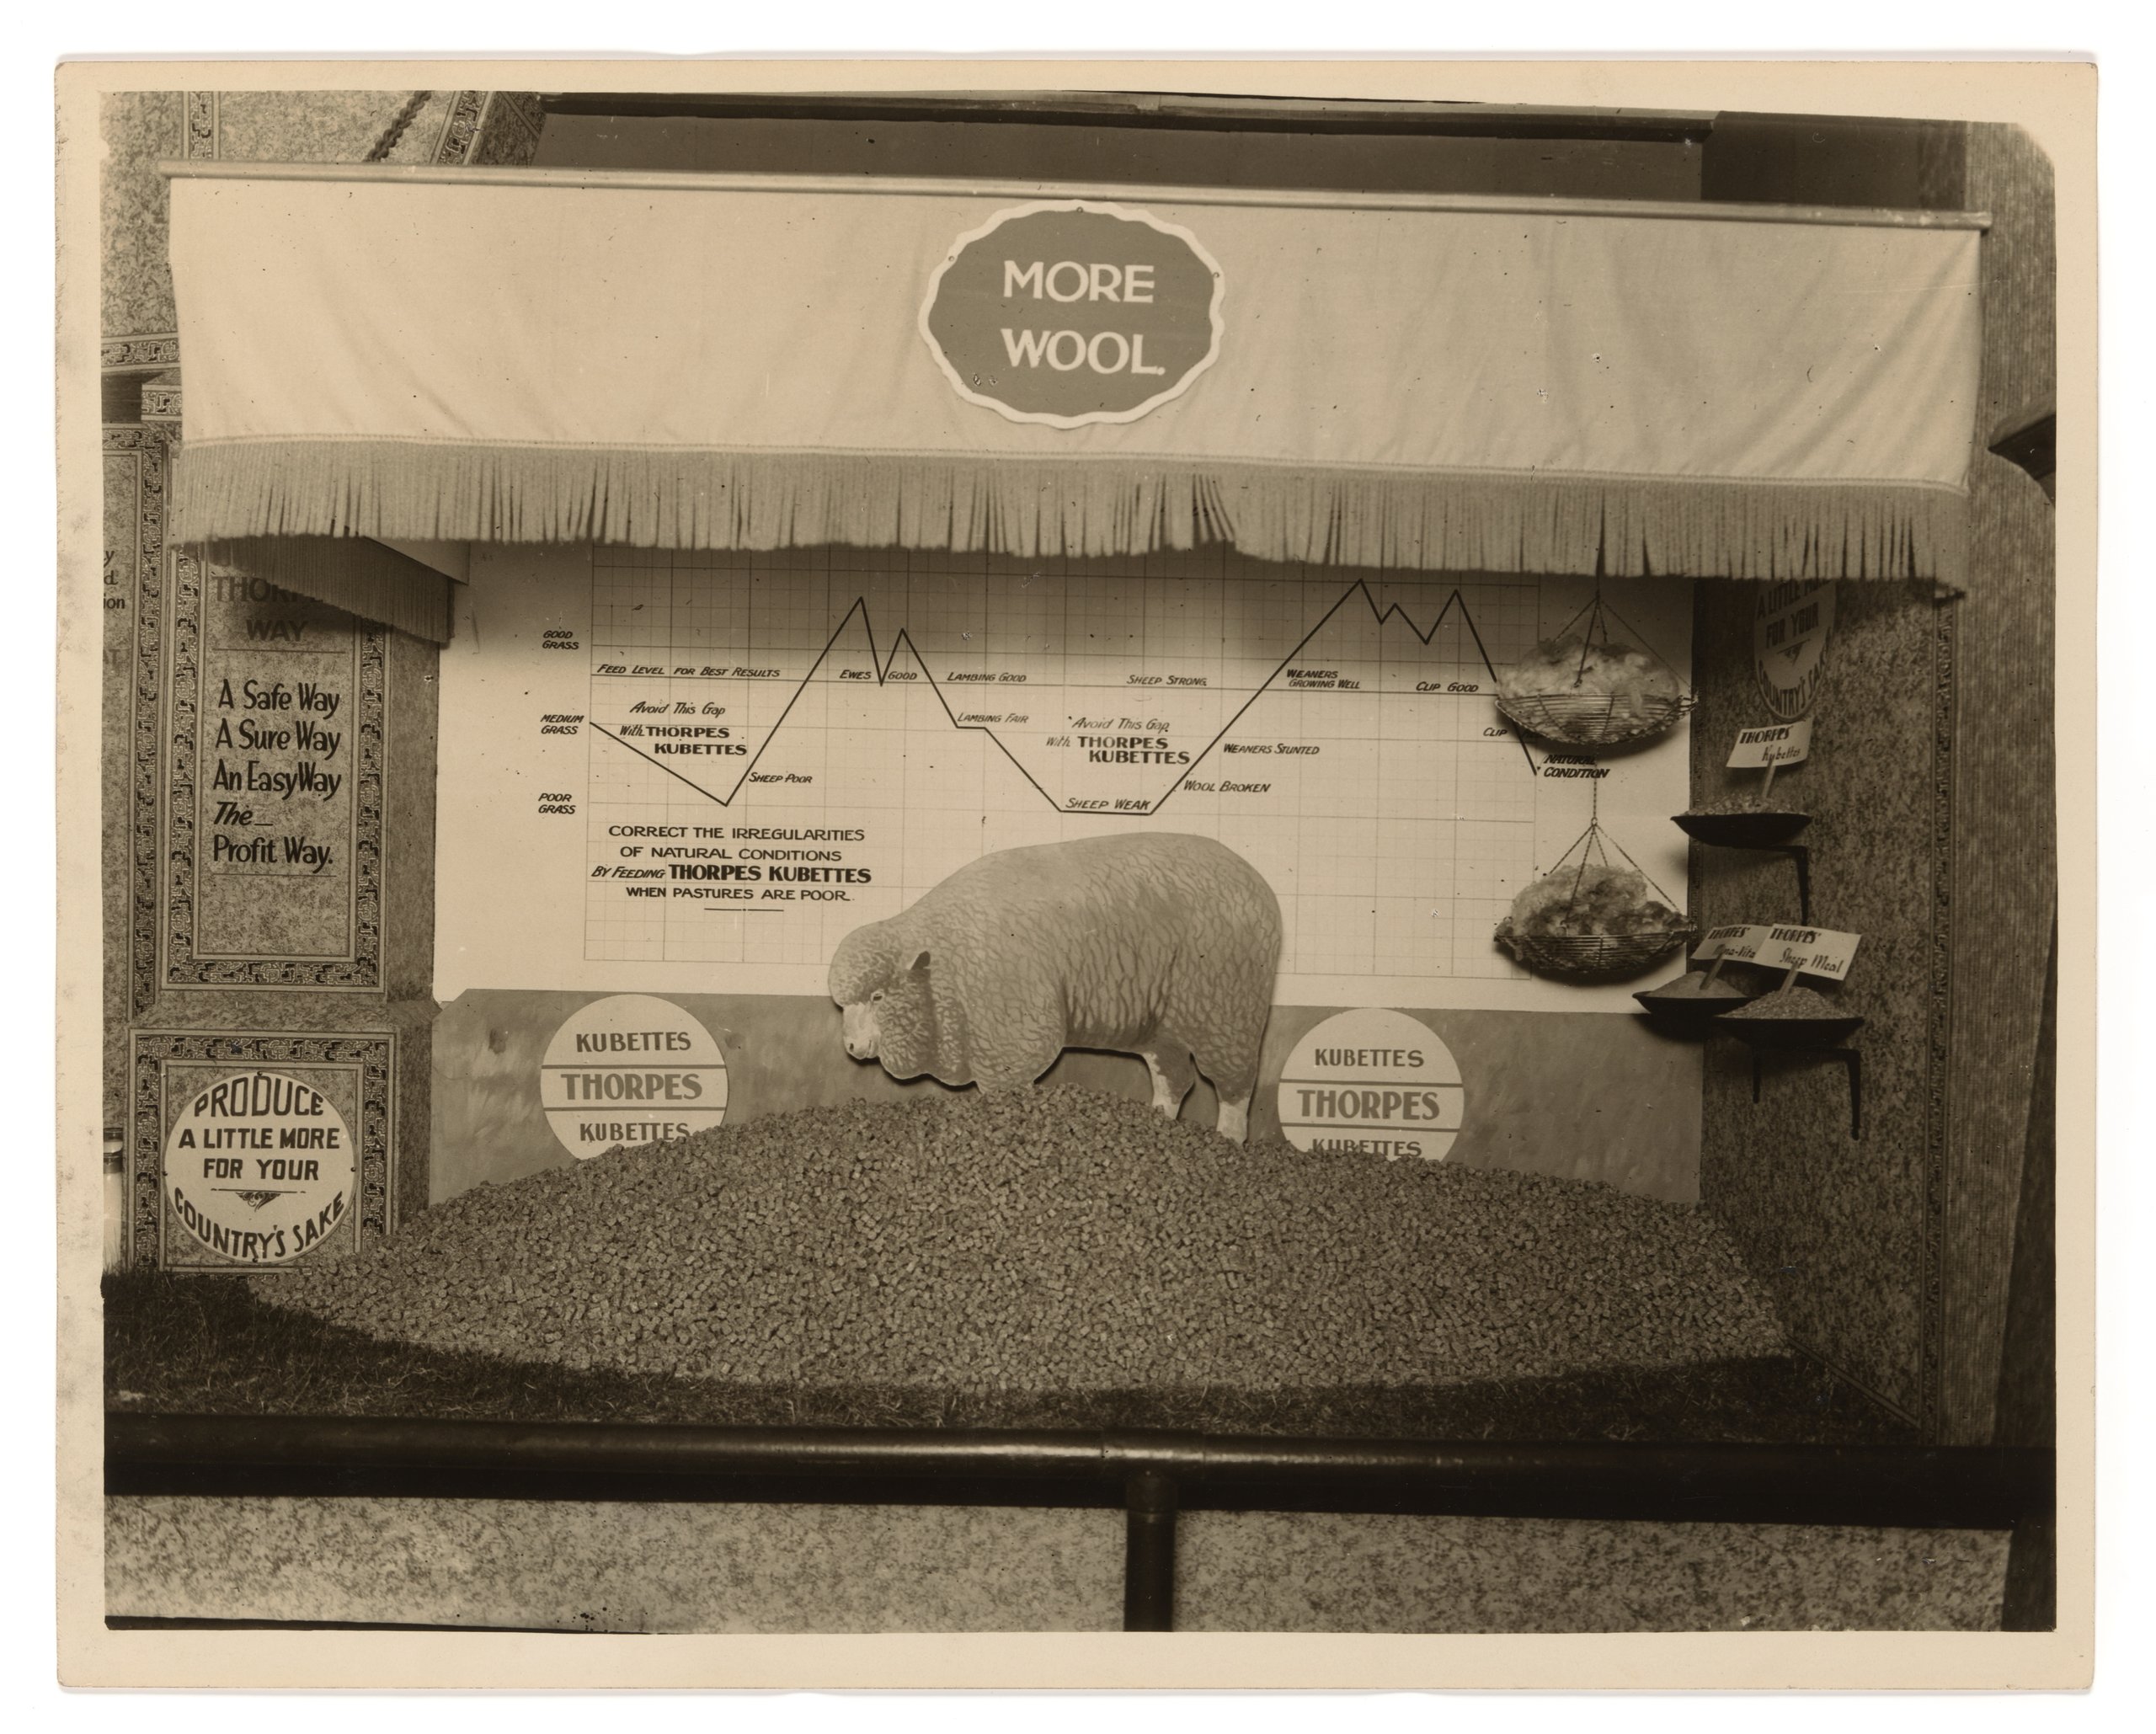 Photograph of promotional exhibit for Thorpes Ltd at Sydney Royal Easter Show